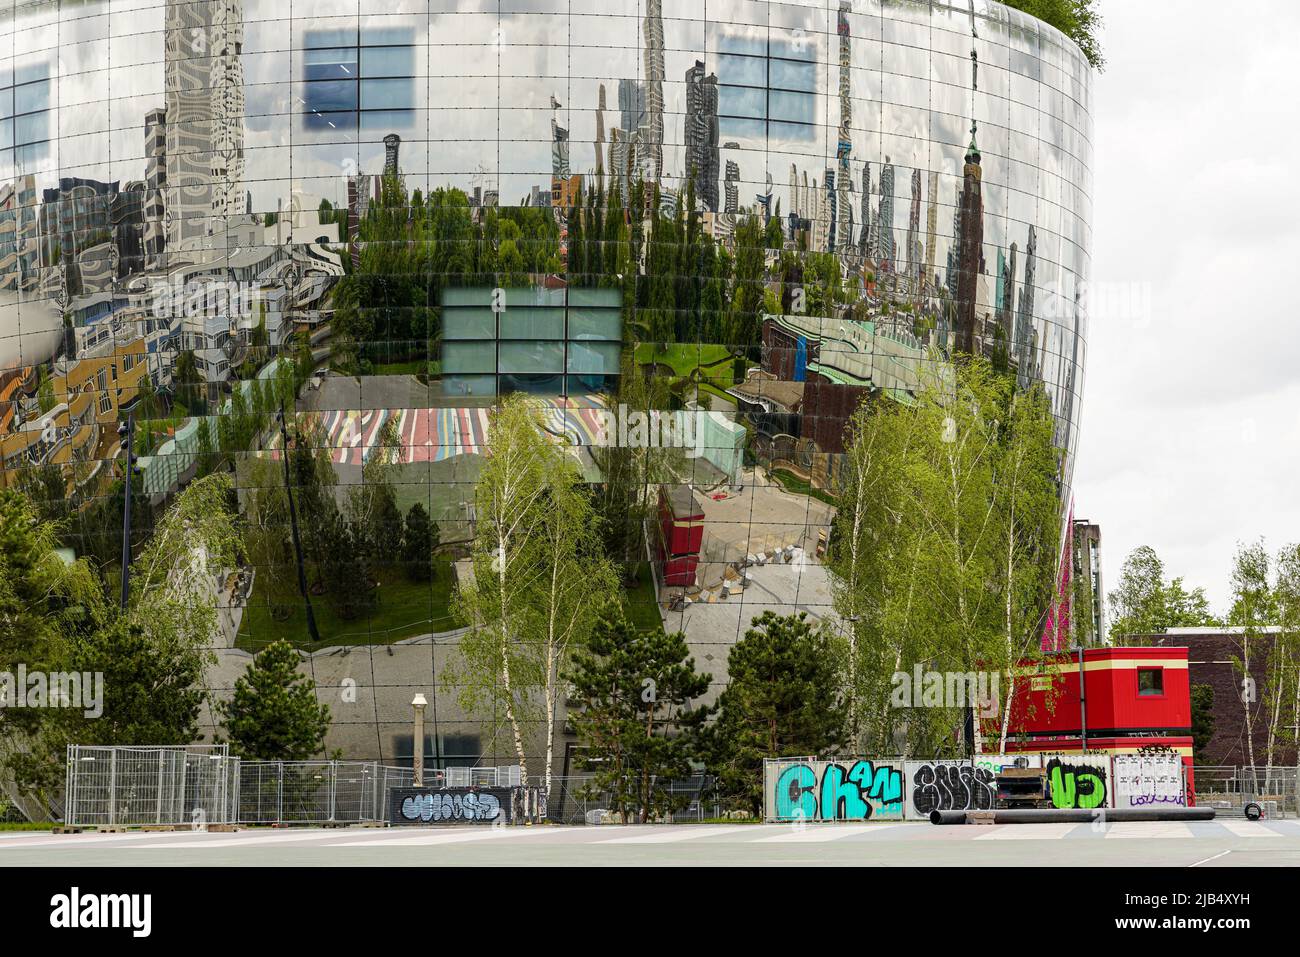 The 40-meter high, six-story Depot in Rotterdam Museum Park, Netherlands on May 25, 2022. The Mirror facade is reflecting the surroundings. Stock Photo